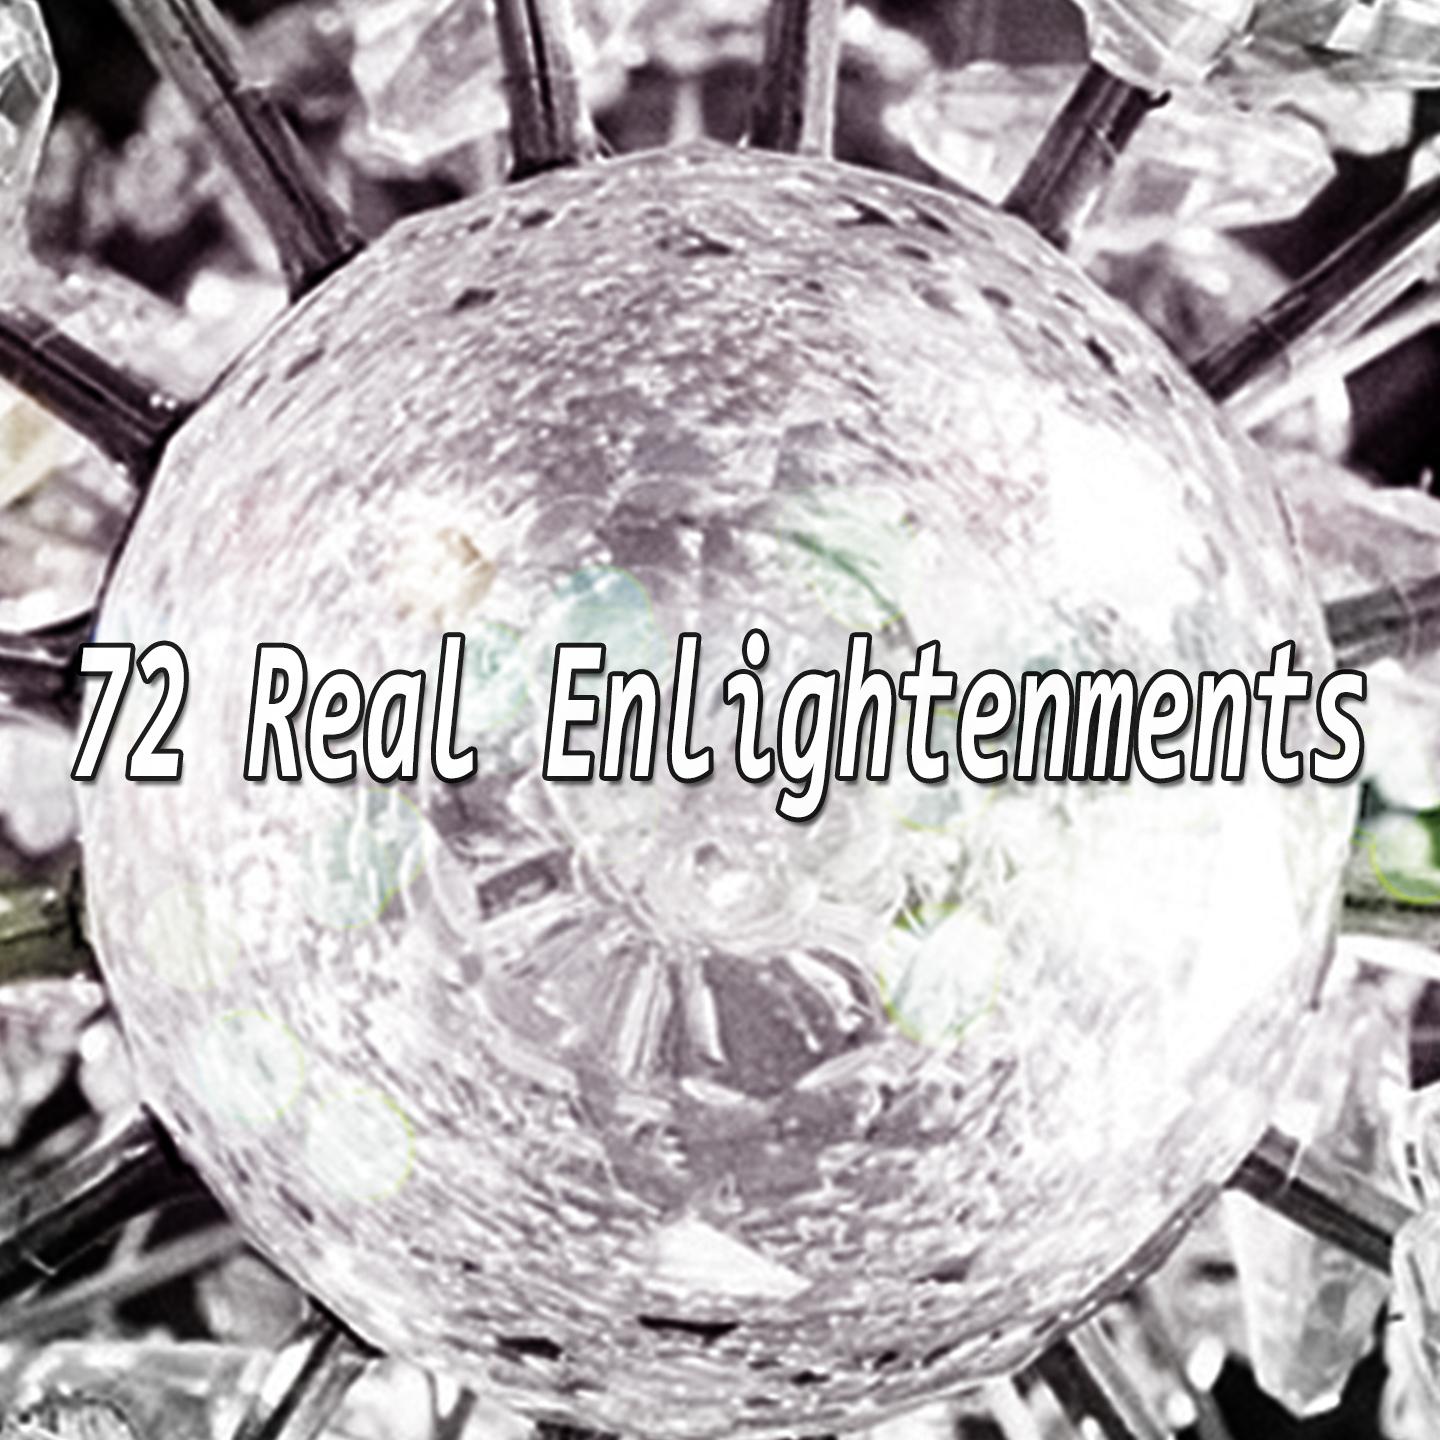 72 Real Enlightenments